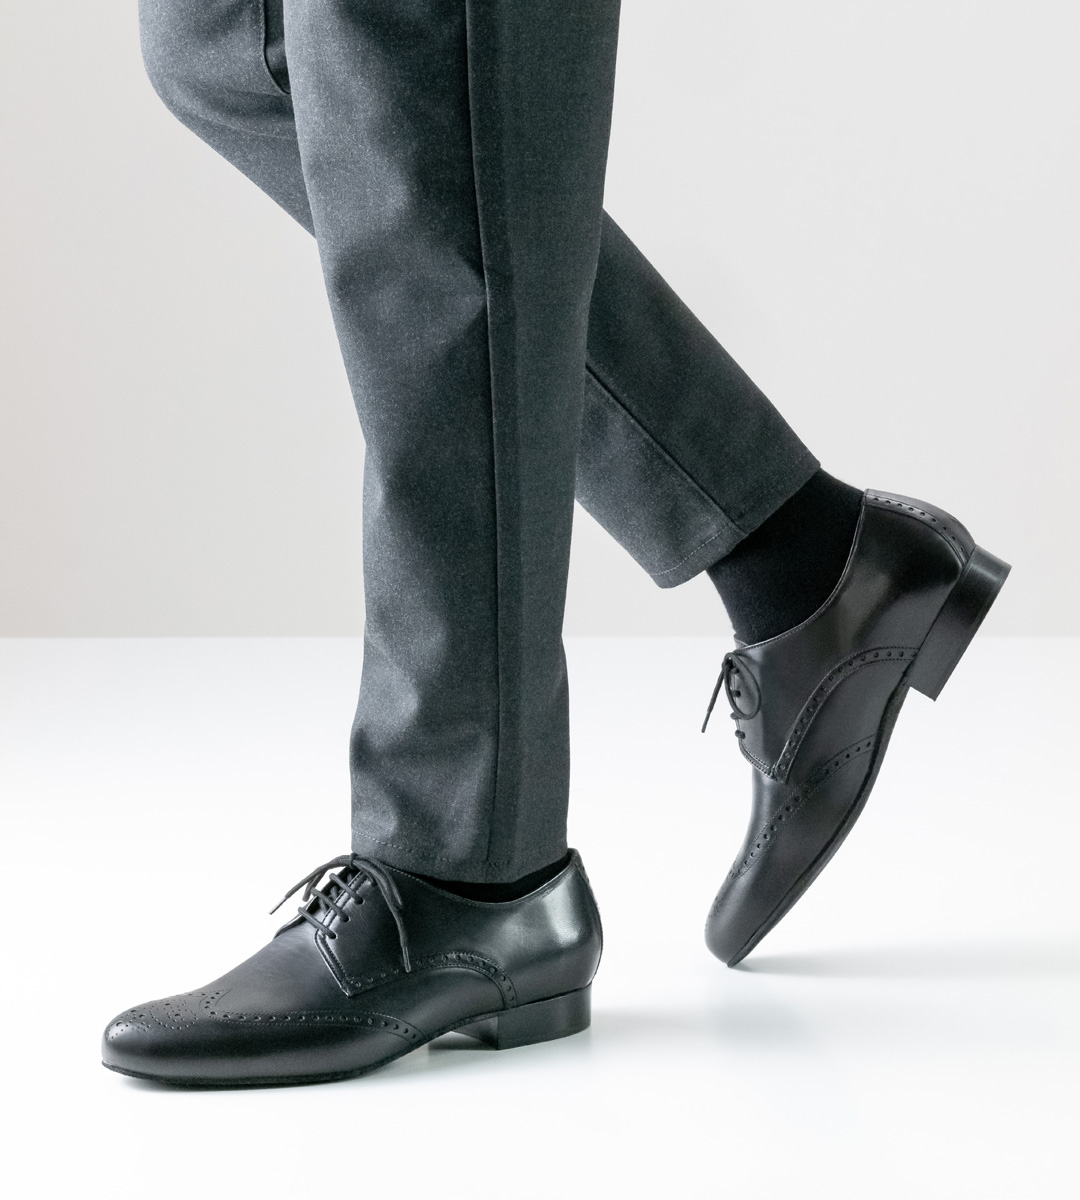 Anna Kern men's dance shoe in black leather combined with grey trousers